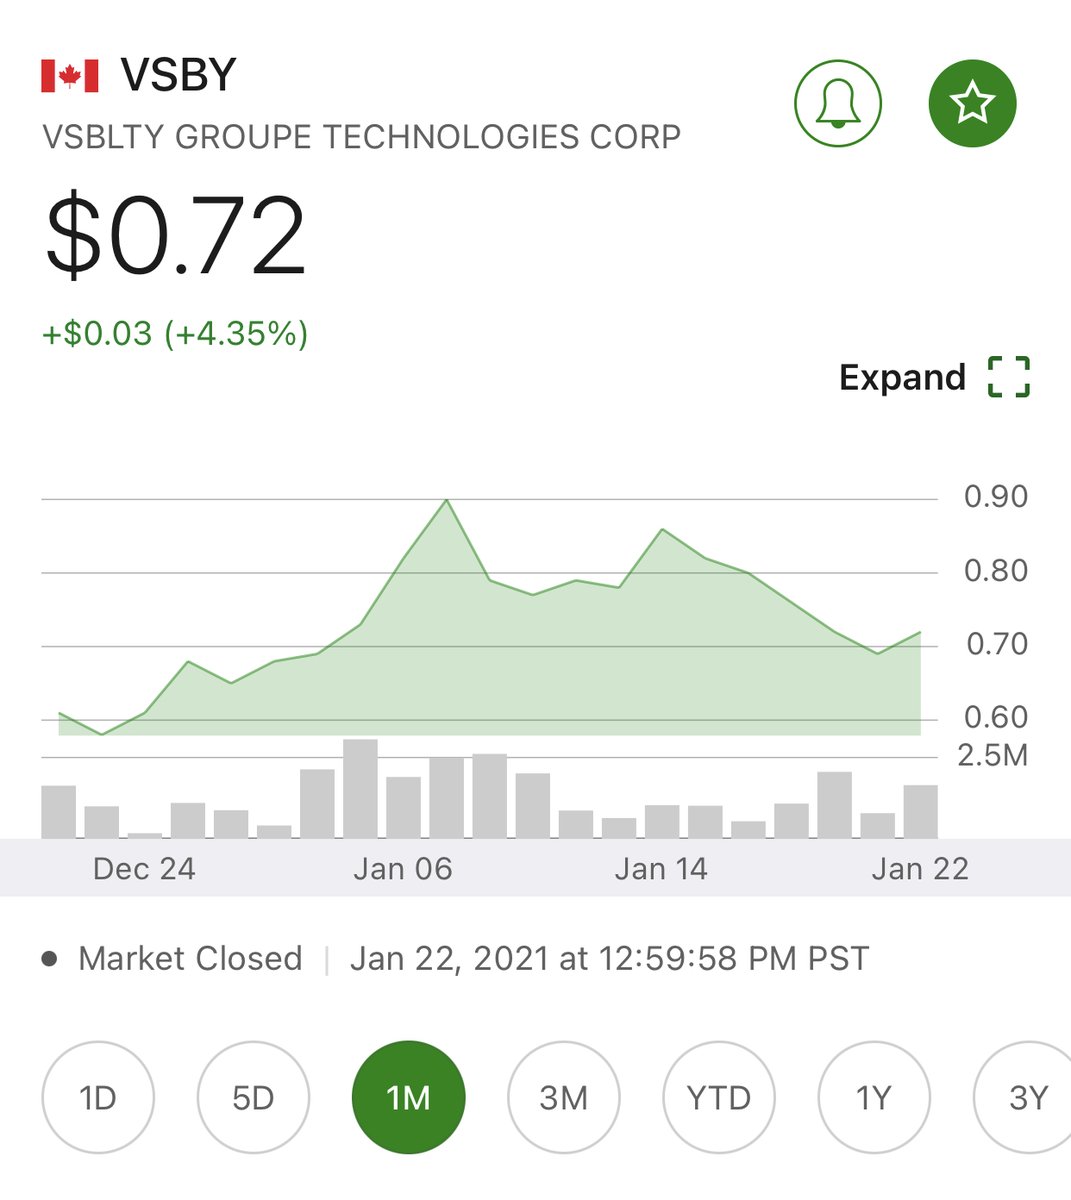 At this point you all know my thoughts on this. Only a matter of time until the market reflects the value that is clearly here.  $VSBY is already a global leader in camera based AI and is going to be profitable in 2021Iron hands for me holding this one.  $VSBGF  $PYR  $KNR  $HS